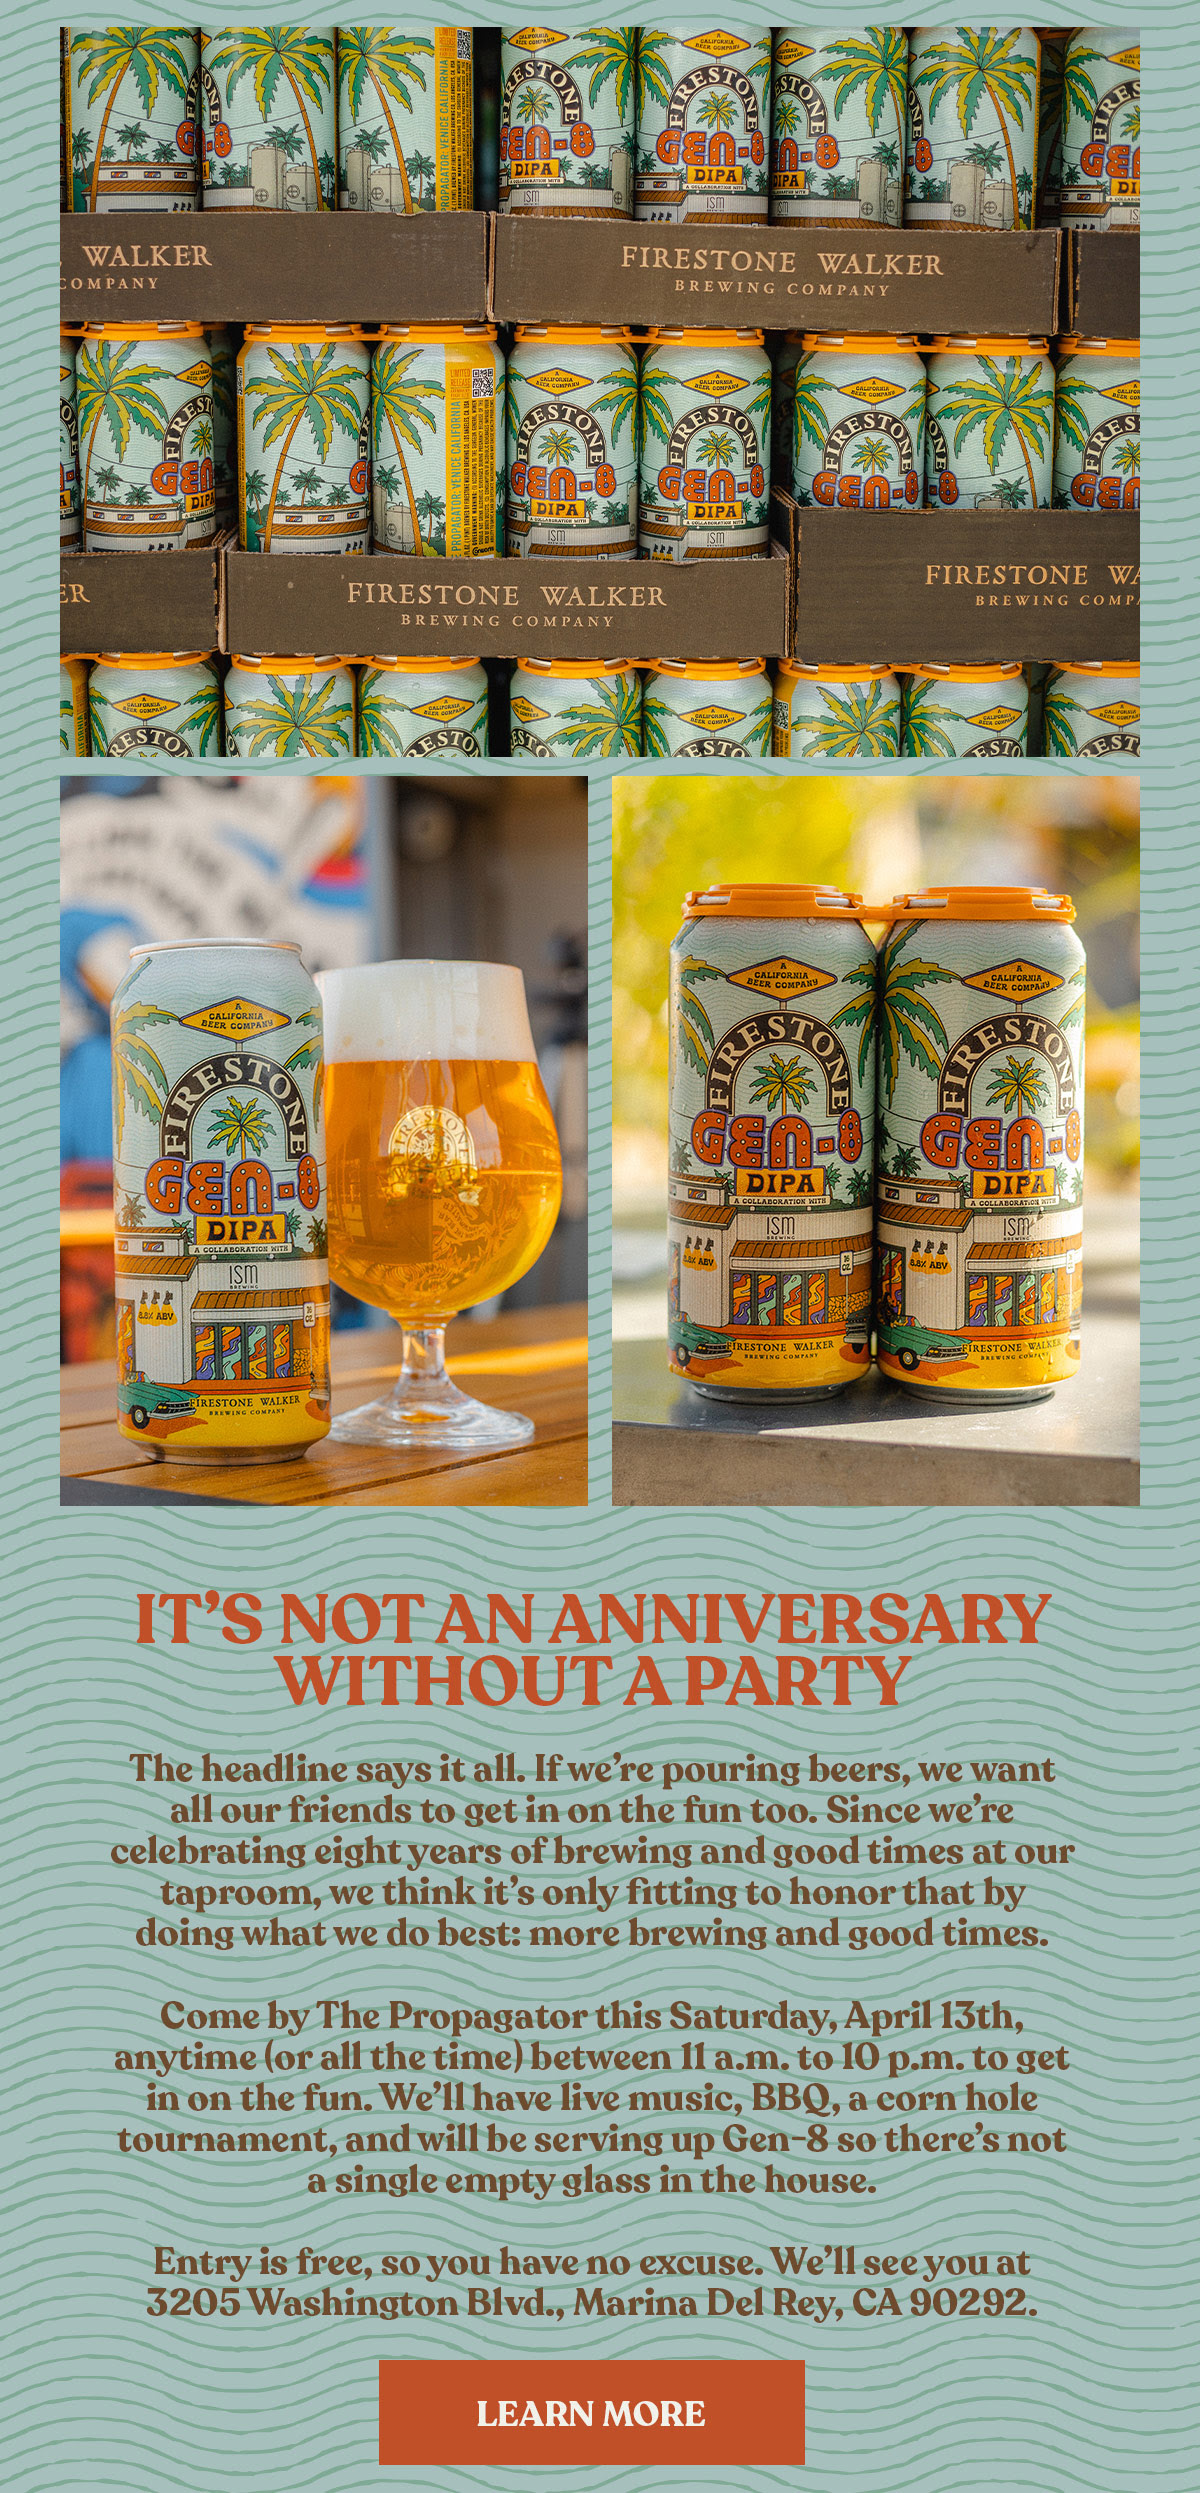 Image shows multiple images of our latest Propagator release, GEN-8. The text reads, “The headline says it all. If we’re pouring beers, we want all our friends to get in on the fun too. Since we’re celebrating eight years of brewing and good times at our taproom, we think it’s only fitting to honor that by doing what we do best: more brewing and good times. Come by The Propagator this Saturday, April 13th, anytime (or all the time) between 11 a.m. to 10 p.m. to get in on the fun. We’ll have live music, BBQ, a corn hole tournament, and will be serving up Gen-8 so there’s not a single empty glass in the house. Entry is free, so you have no excuse. We’ll see you at 3205 Washington Blvd., Marina Del Rey, CA 90292 ” Click here to get the details.